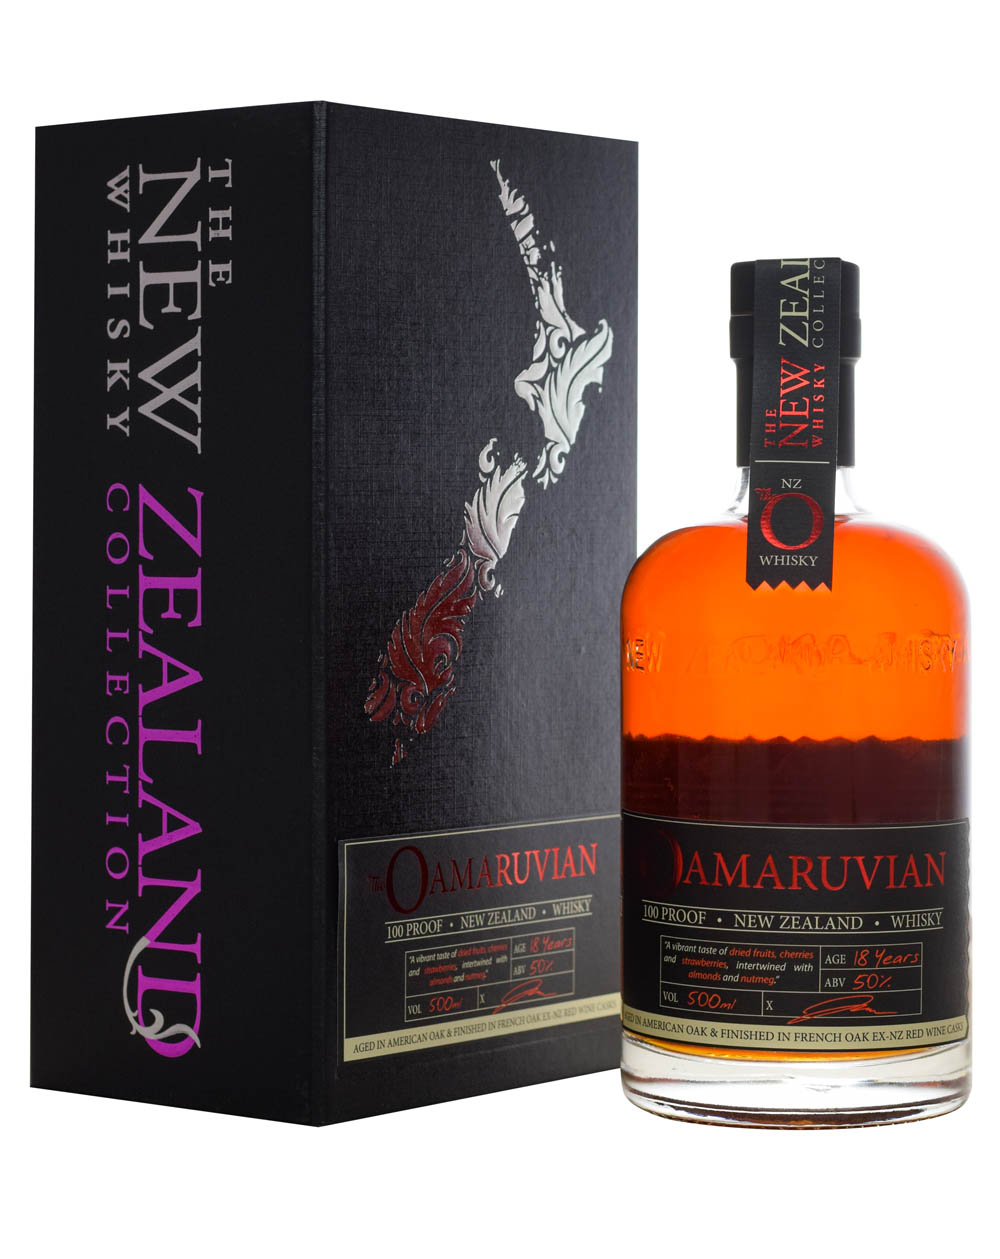 Oamaruvian 18 Years Old New Zealand Whisky Box Musthave Malts MHM